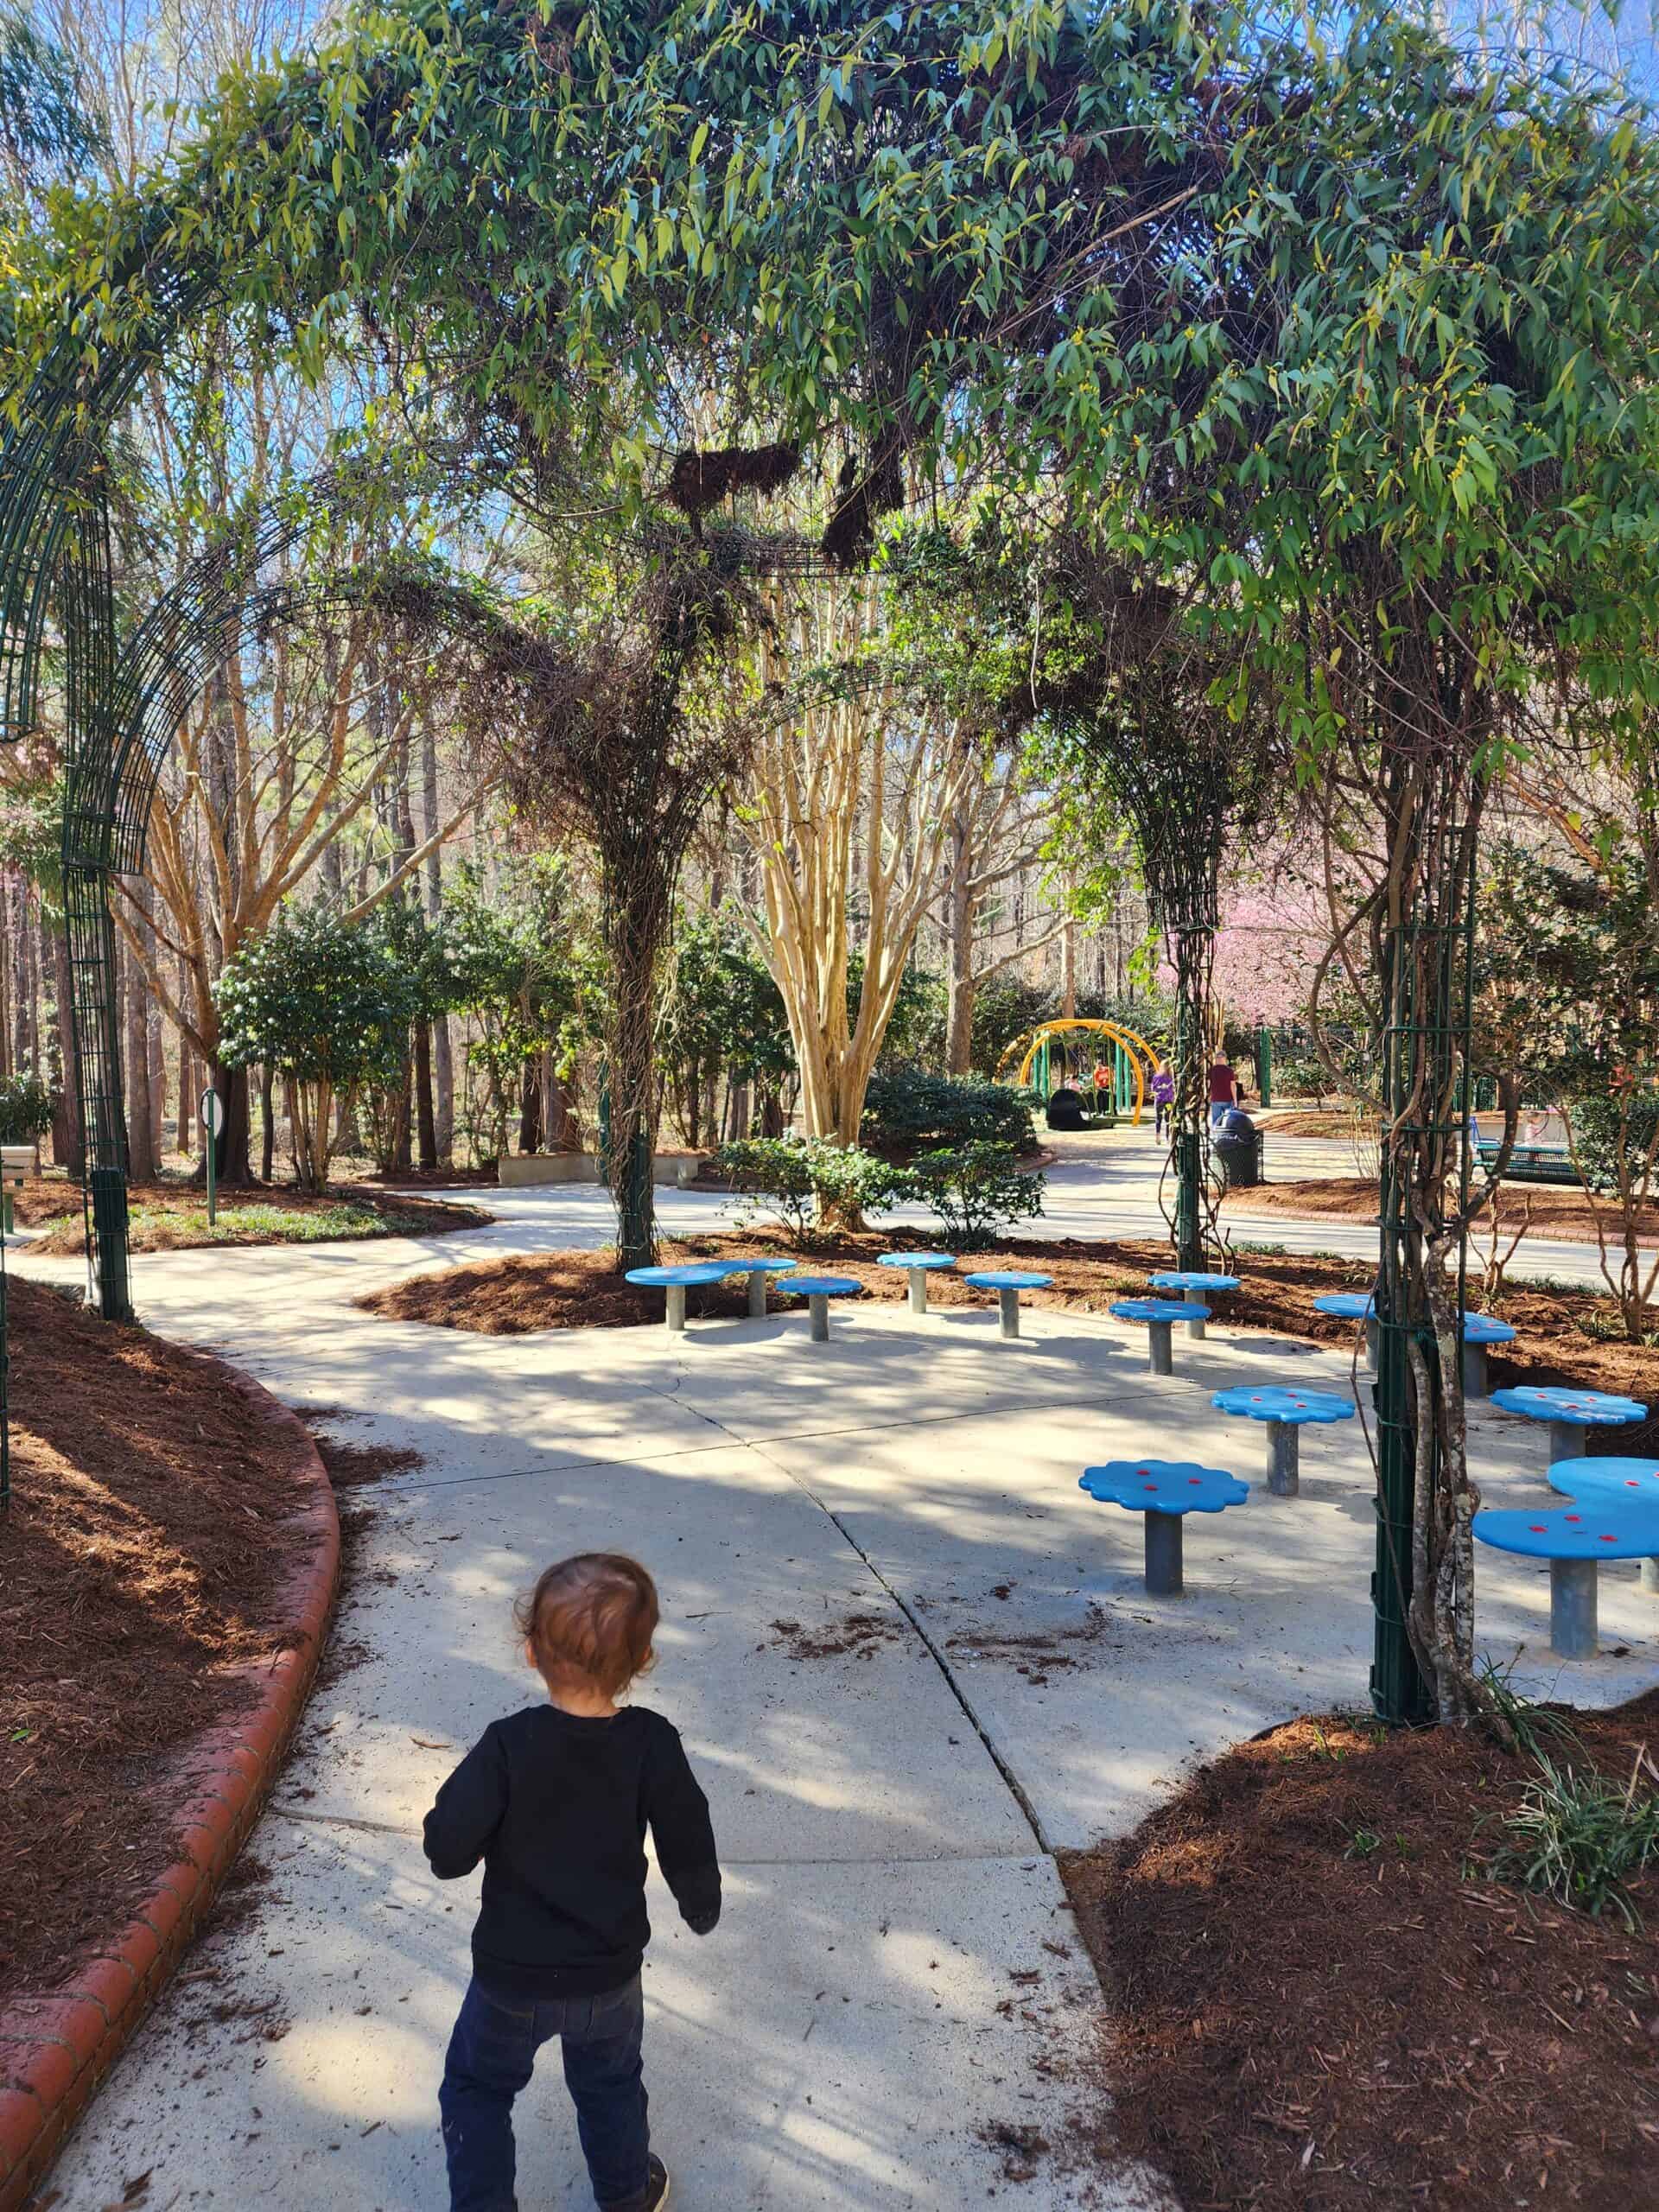 A young child approaches a whimsical outdoor area with blue mushroom-shaped stools under the shade of an arching trellis covered in greenery, in a peaceful park setting in Cary, North Carolina. The path, bordered with red edging, leads to an inviting playground in the distance, nestled among tall trees and a clear blue sky